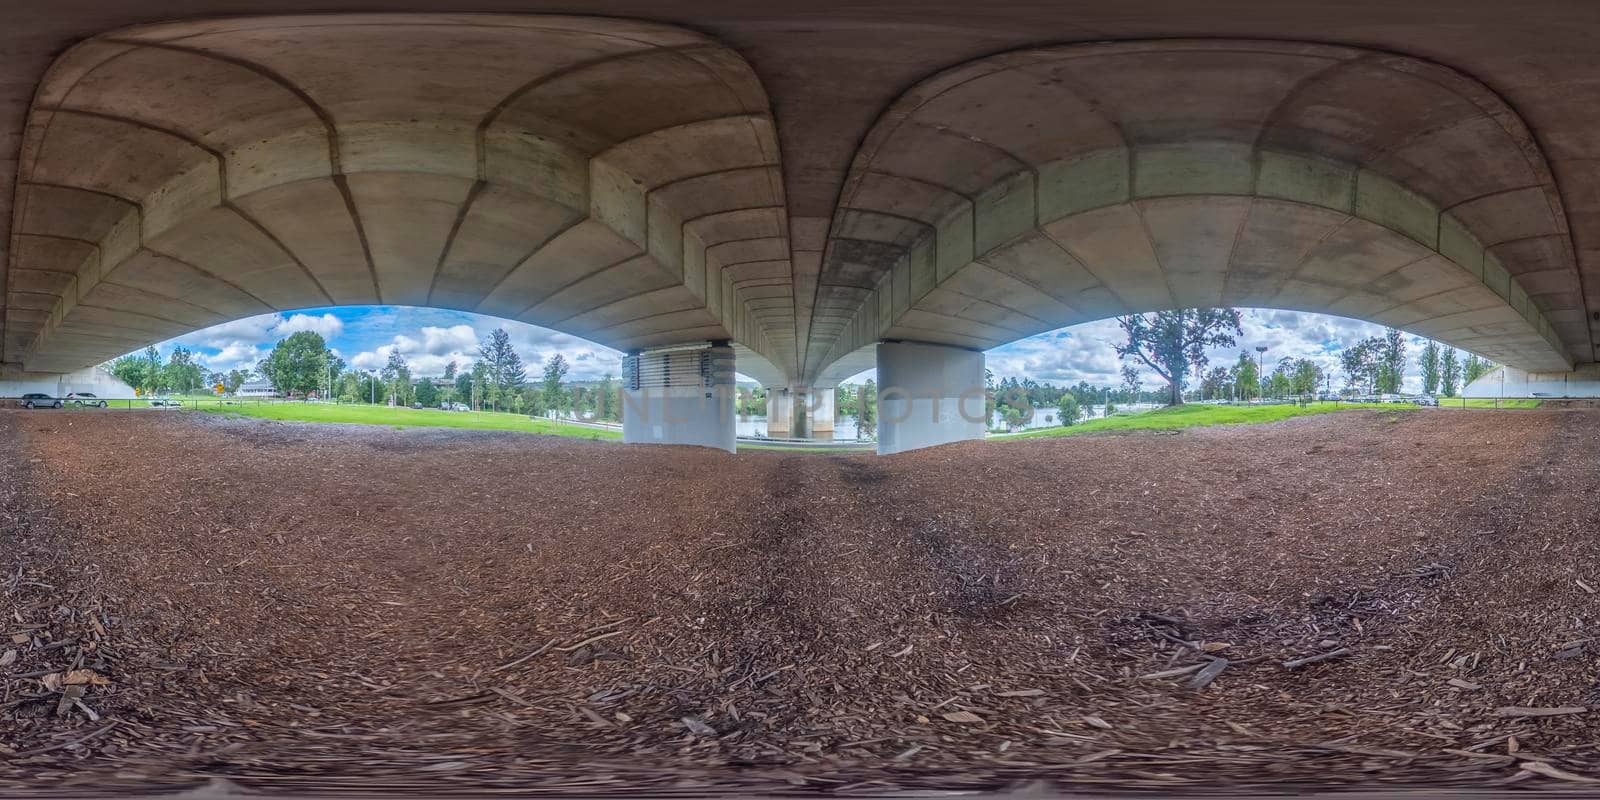 Spherical 360 panorama photograph under the bridge that spans the Nepean River in Penrith in regional New South Wales in Australia